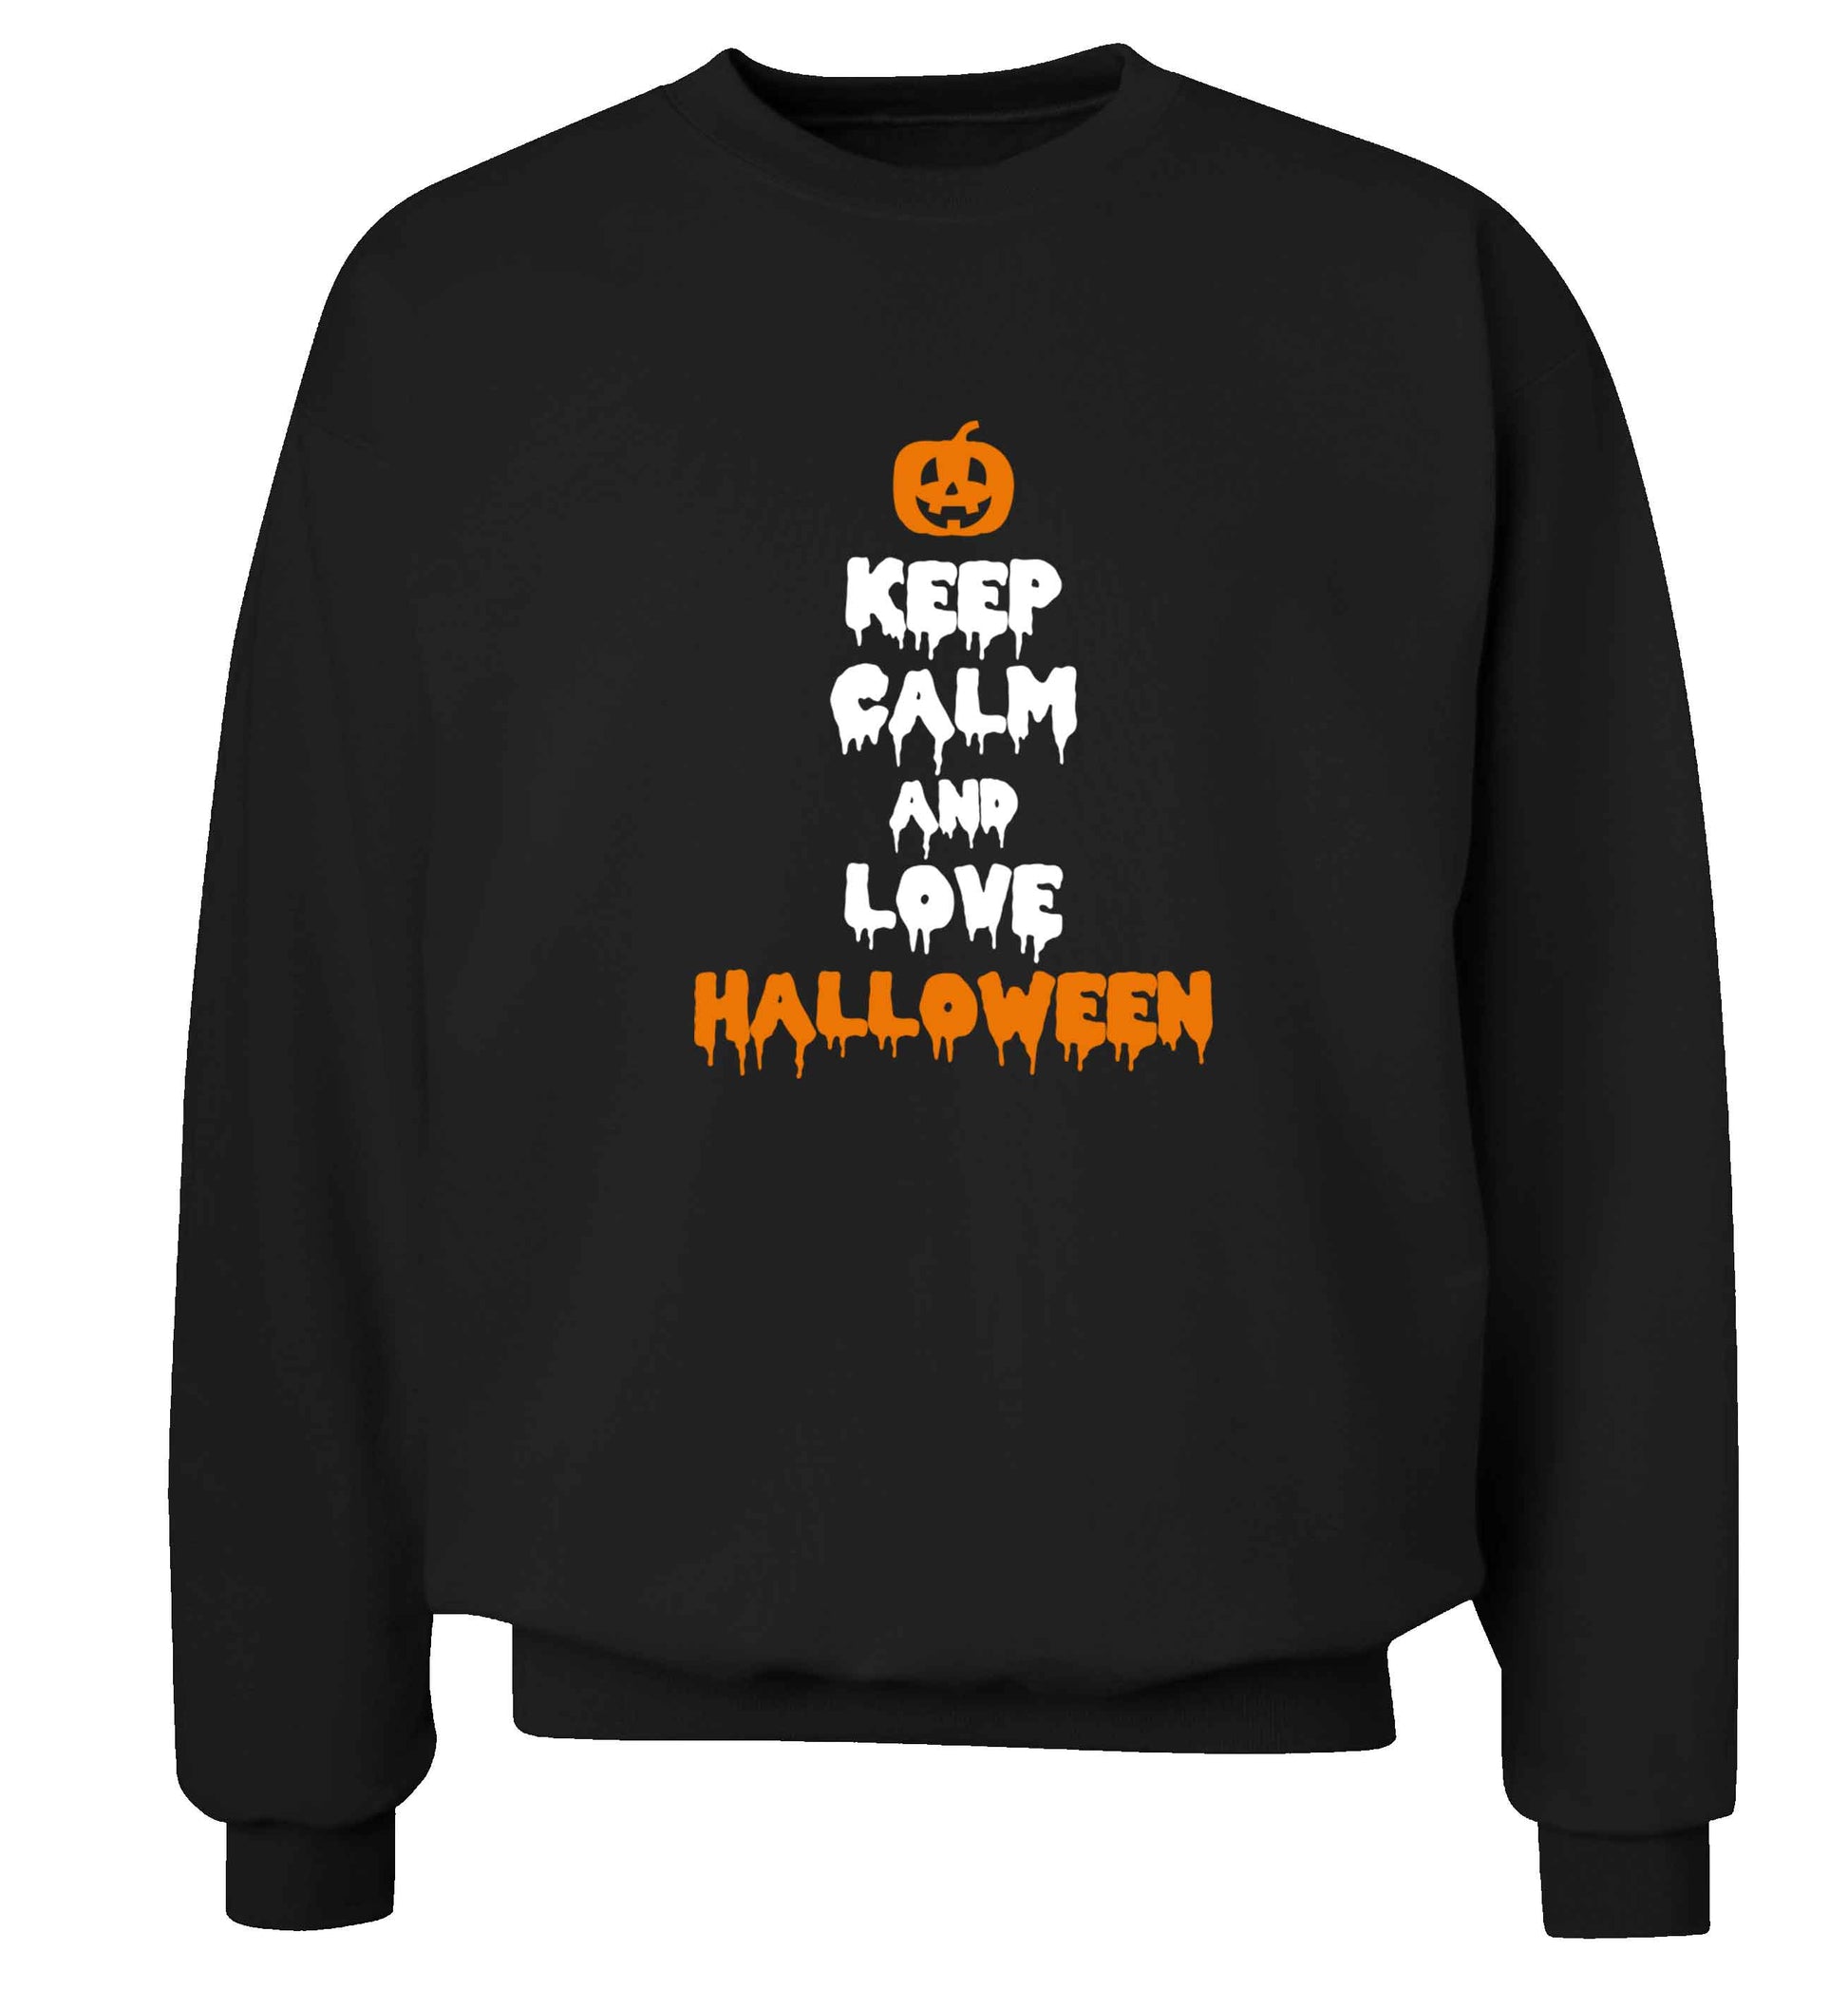 Keep calm and love halloween adult's unisex black sweater 2XL